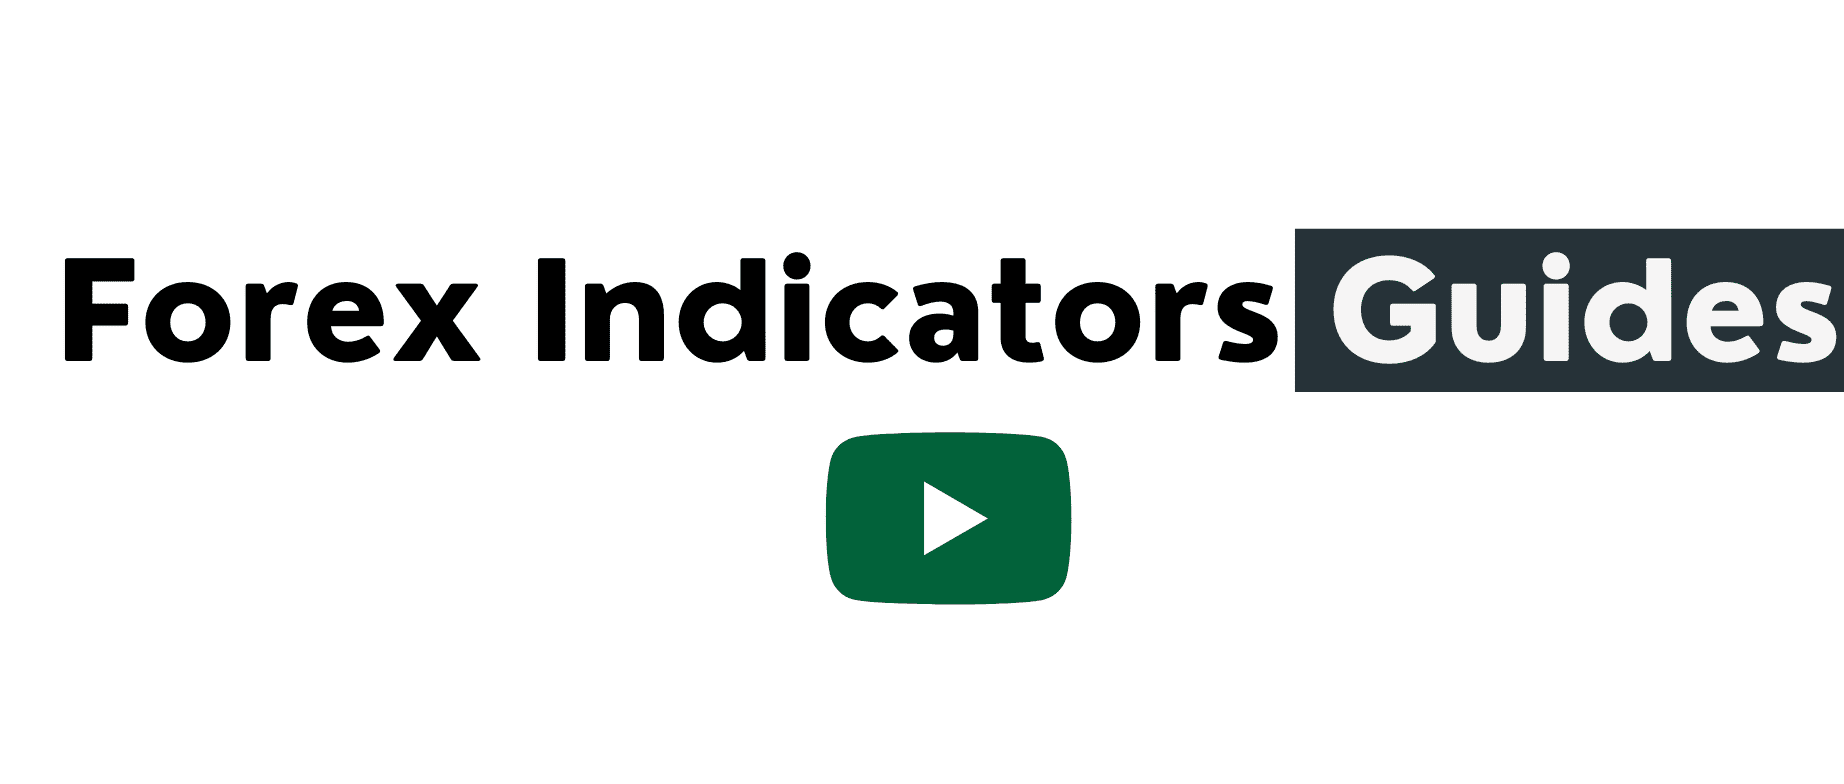 Best MT5 and MT4 Indicators guidelines free to download for forex traders